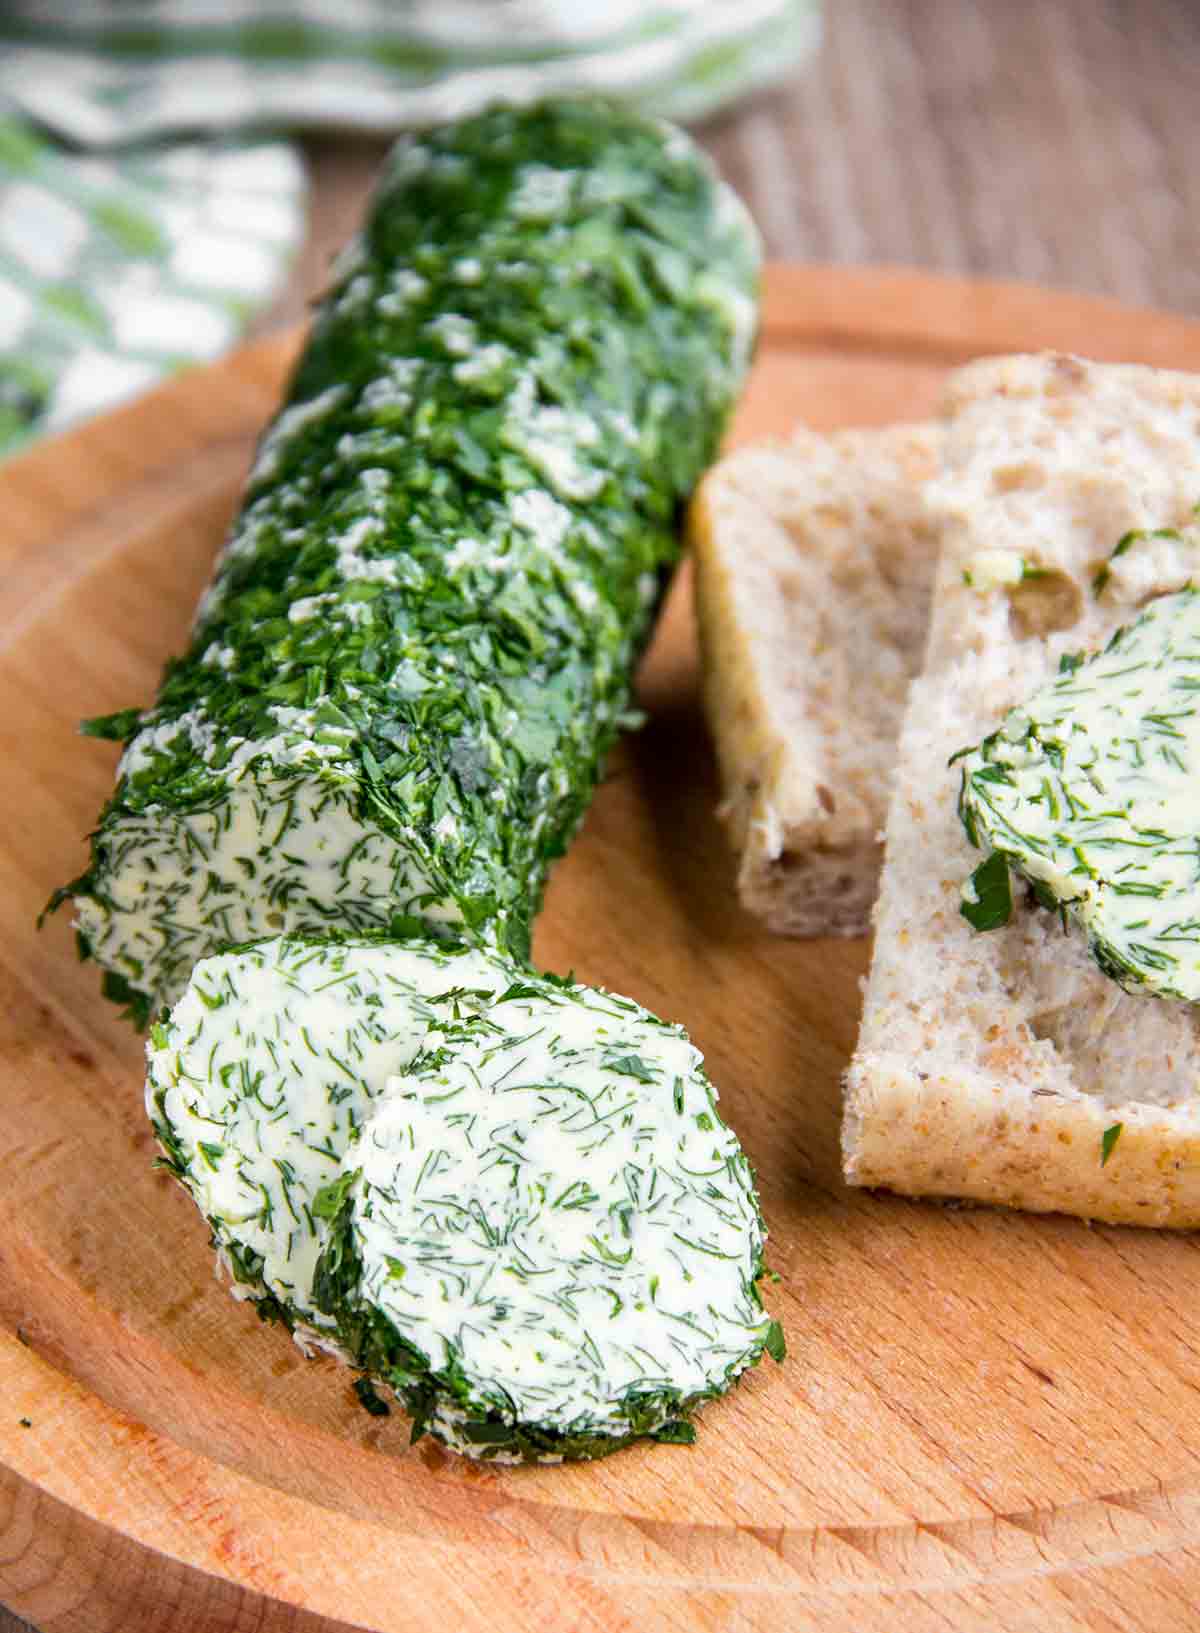 A log of maître d'hotel butter, covered in chopped parsley, on a cutting board, with bread on the side.